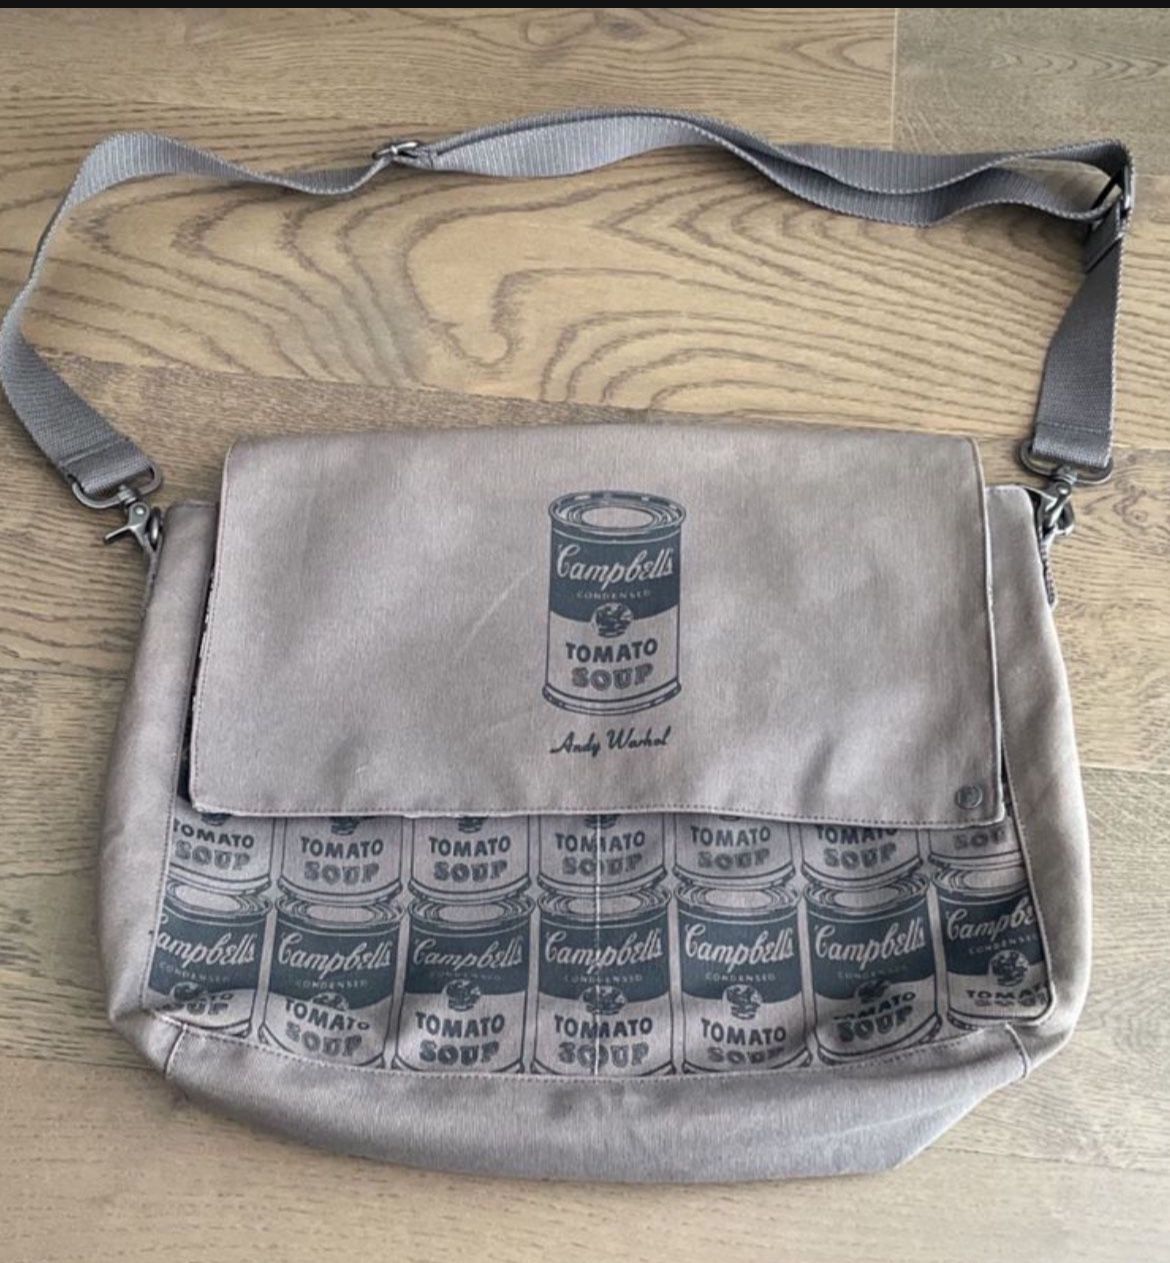 New! Andy Warhol Campbell’s Soup Messenger Bag